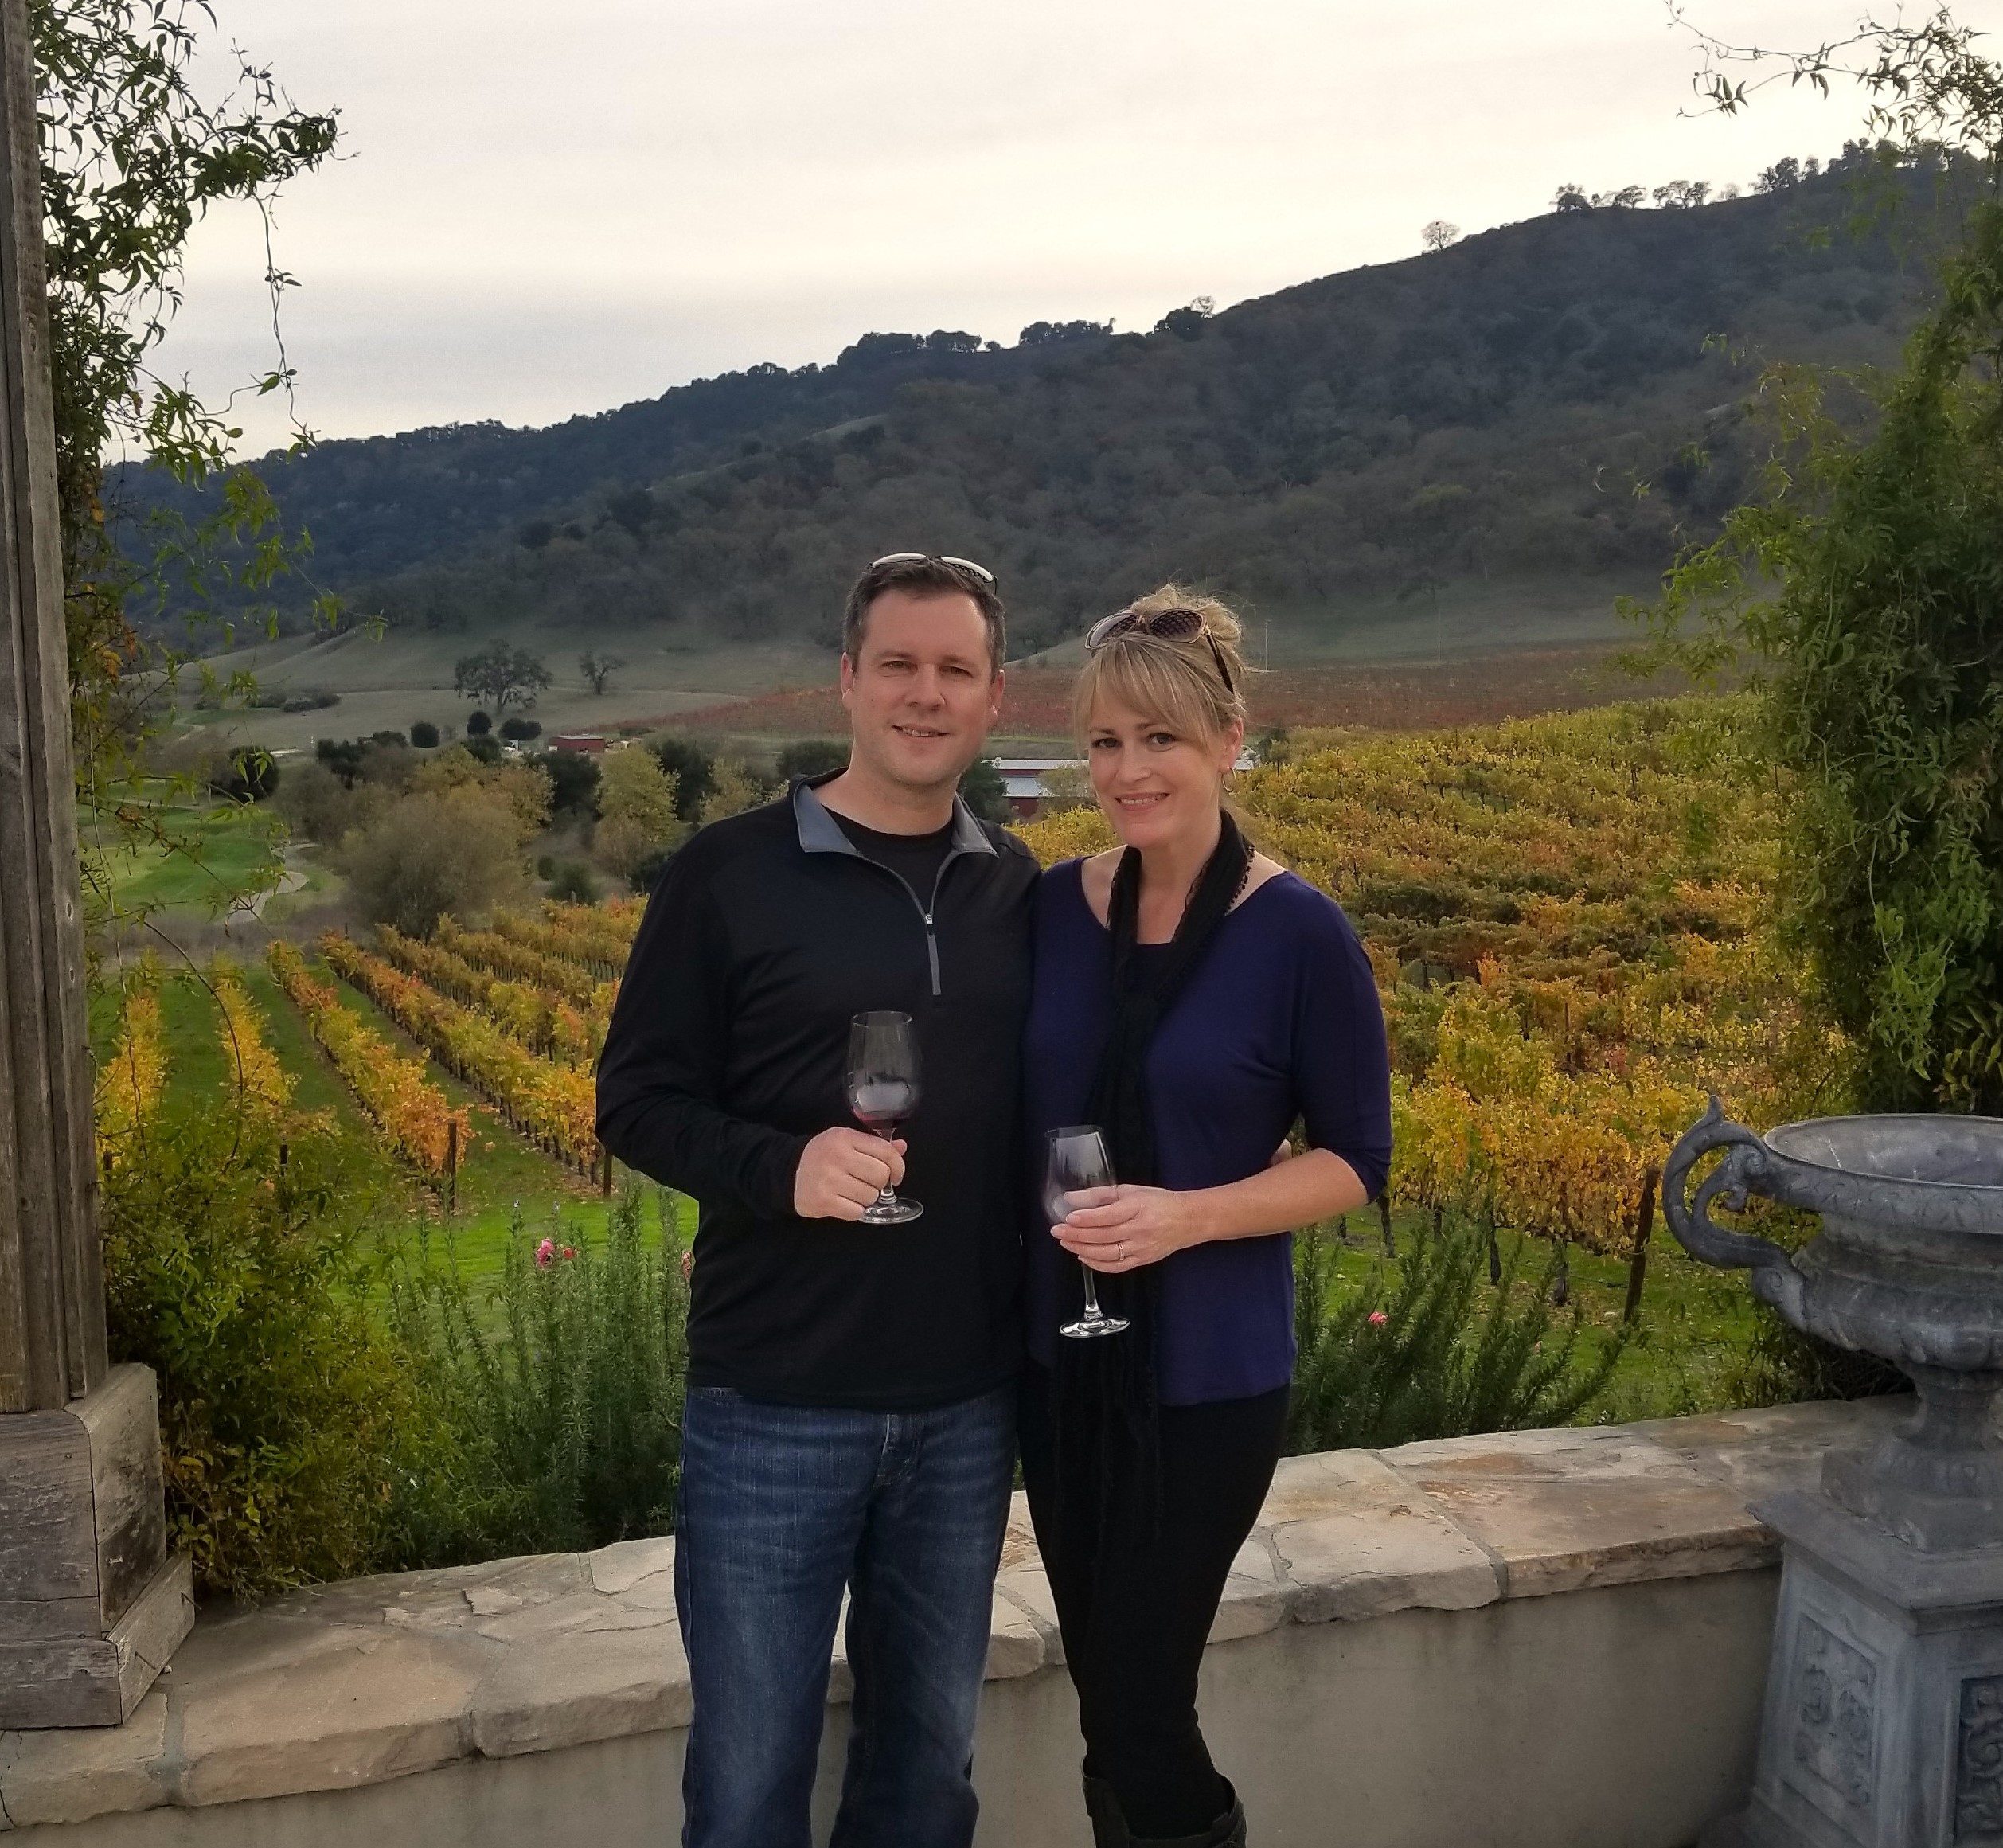 Couple standing together with wine glasses in front of vineyard scenery during harvest season.